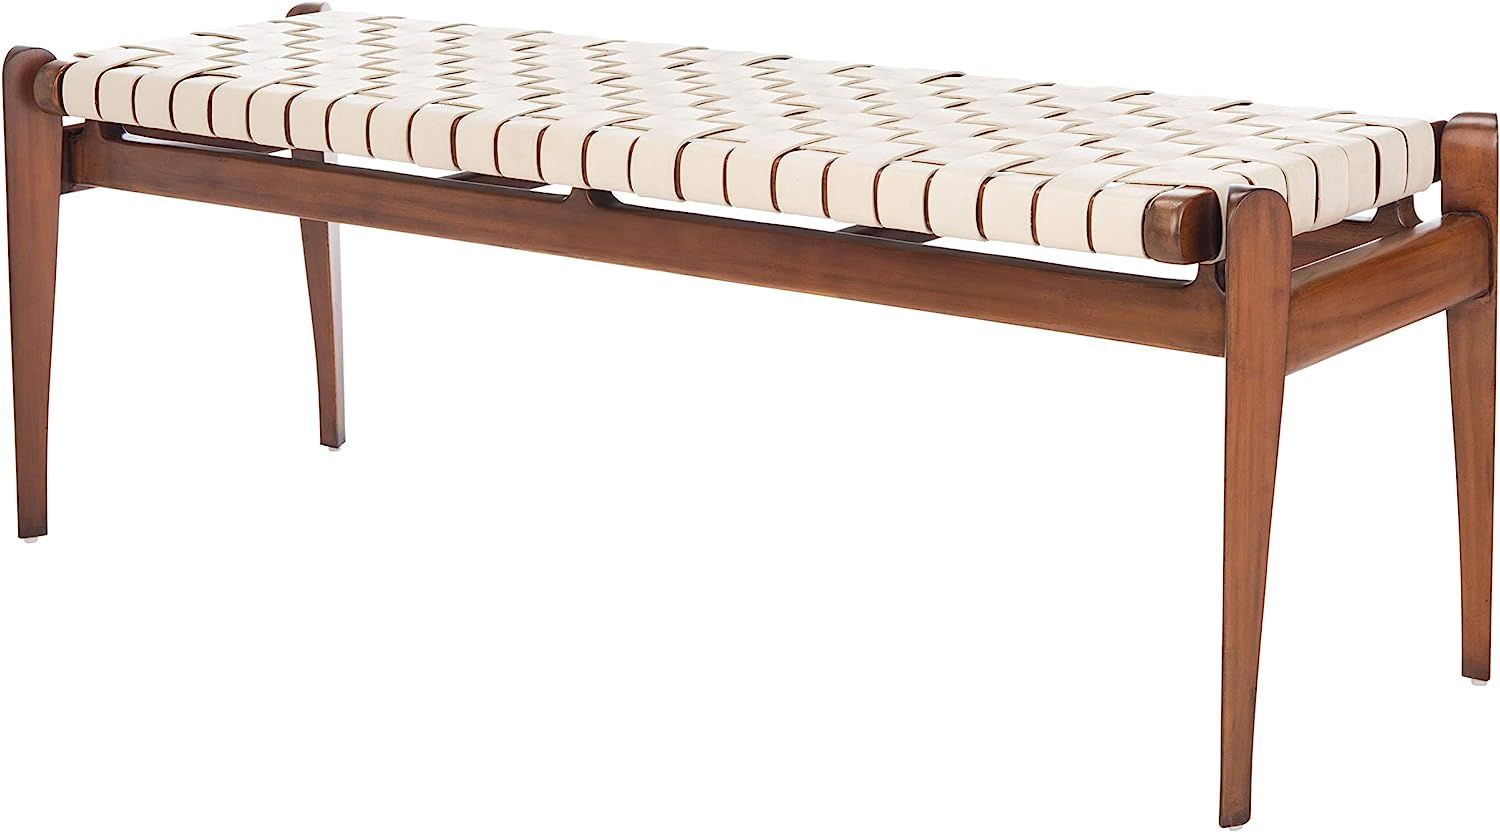 Safavieh Couture Home Dilan 47-inch White and Light Brown Leather Weave Bench | Amazon (US)